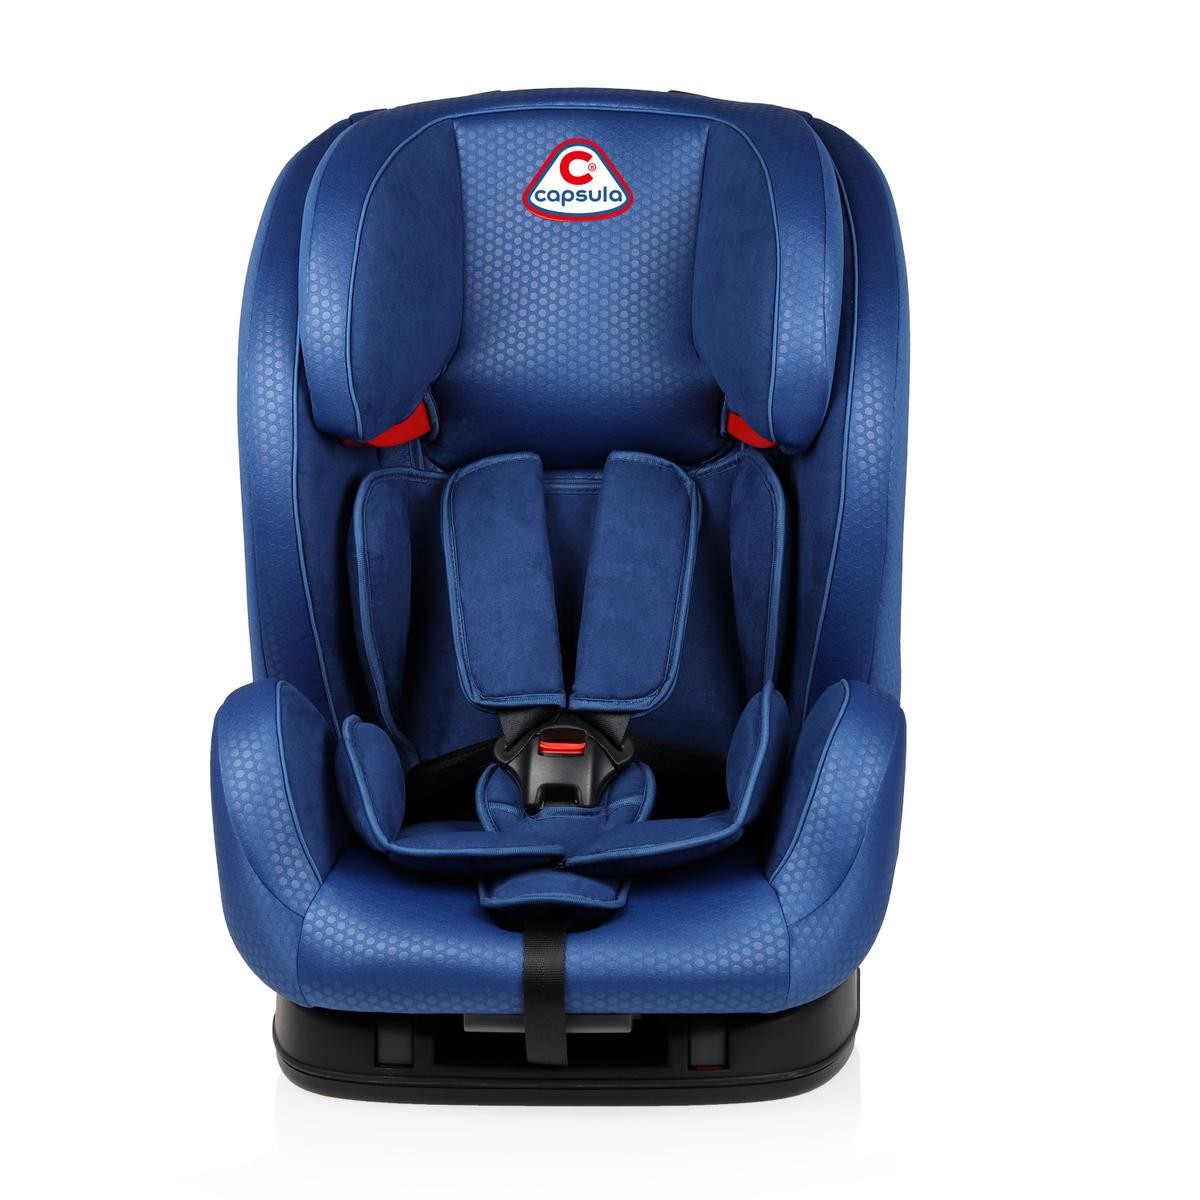 Child car seat 771140 from capsula